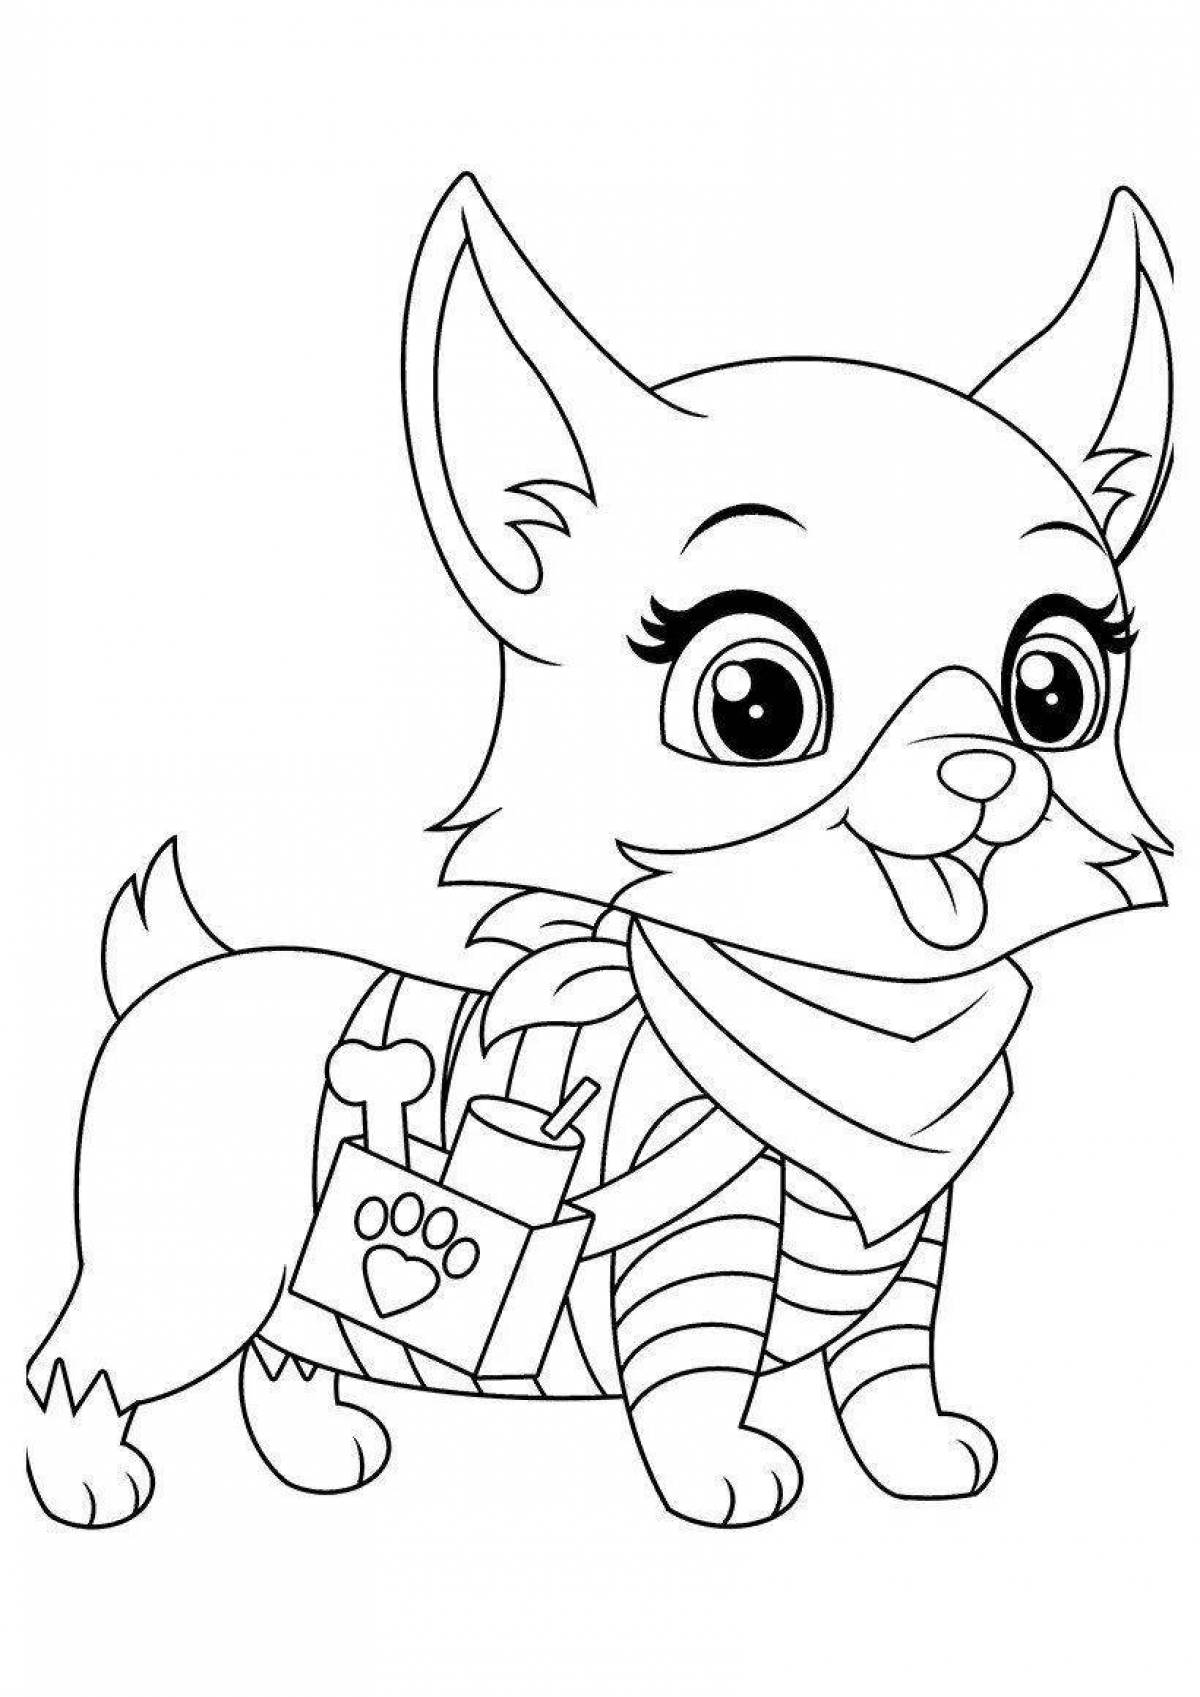 Exciting cat and dog coloring pages